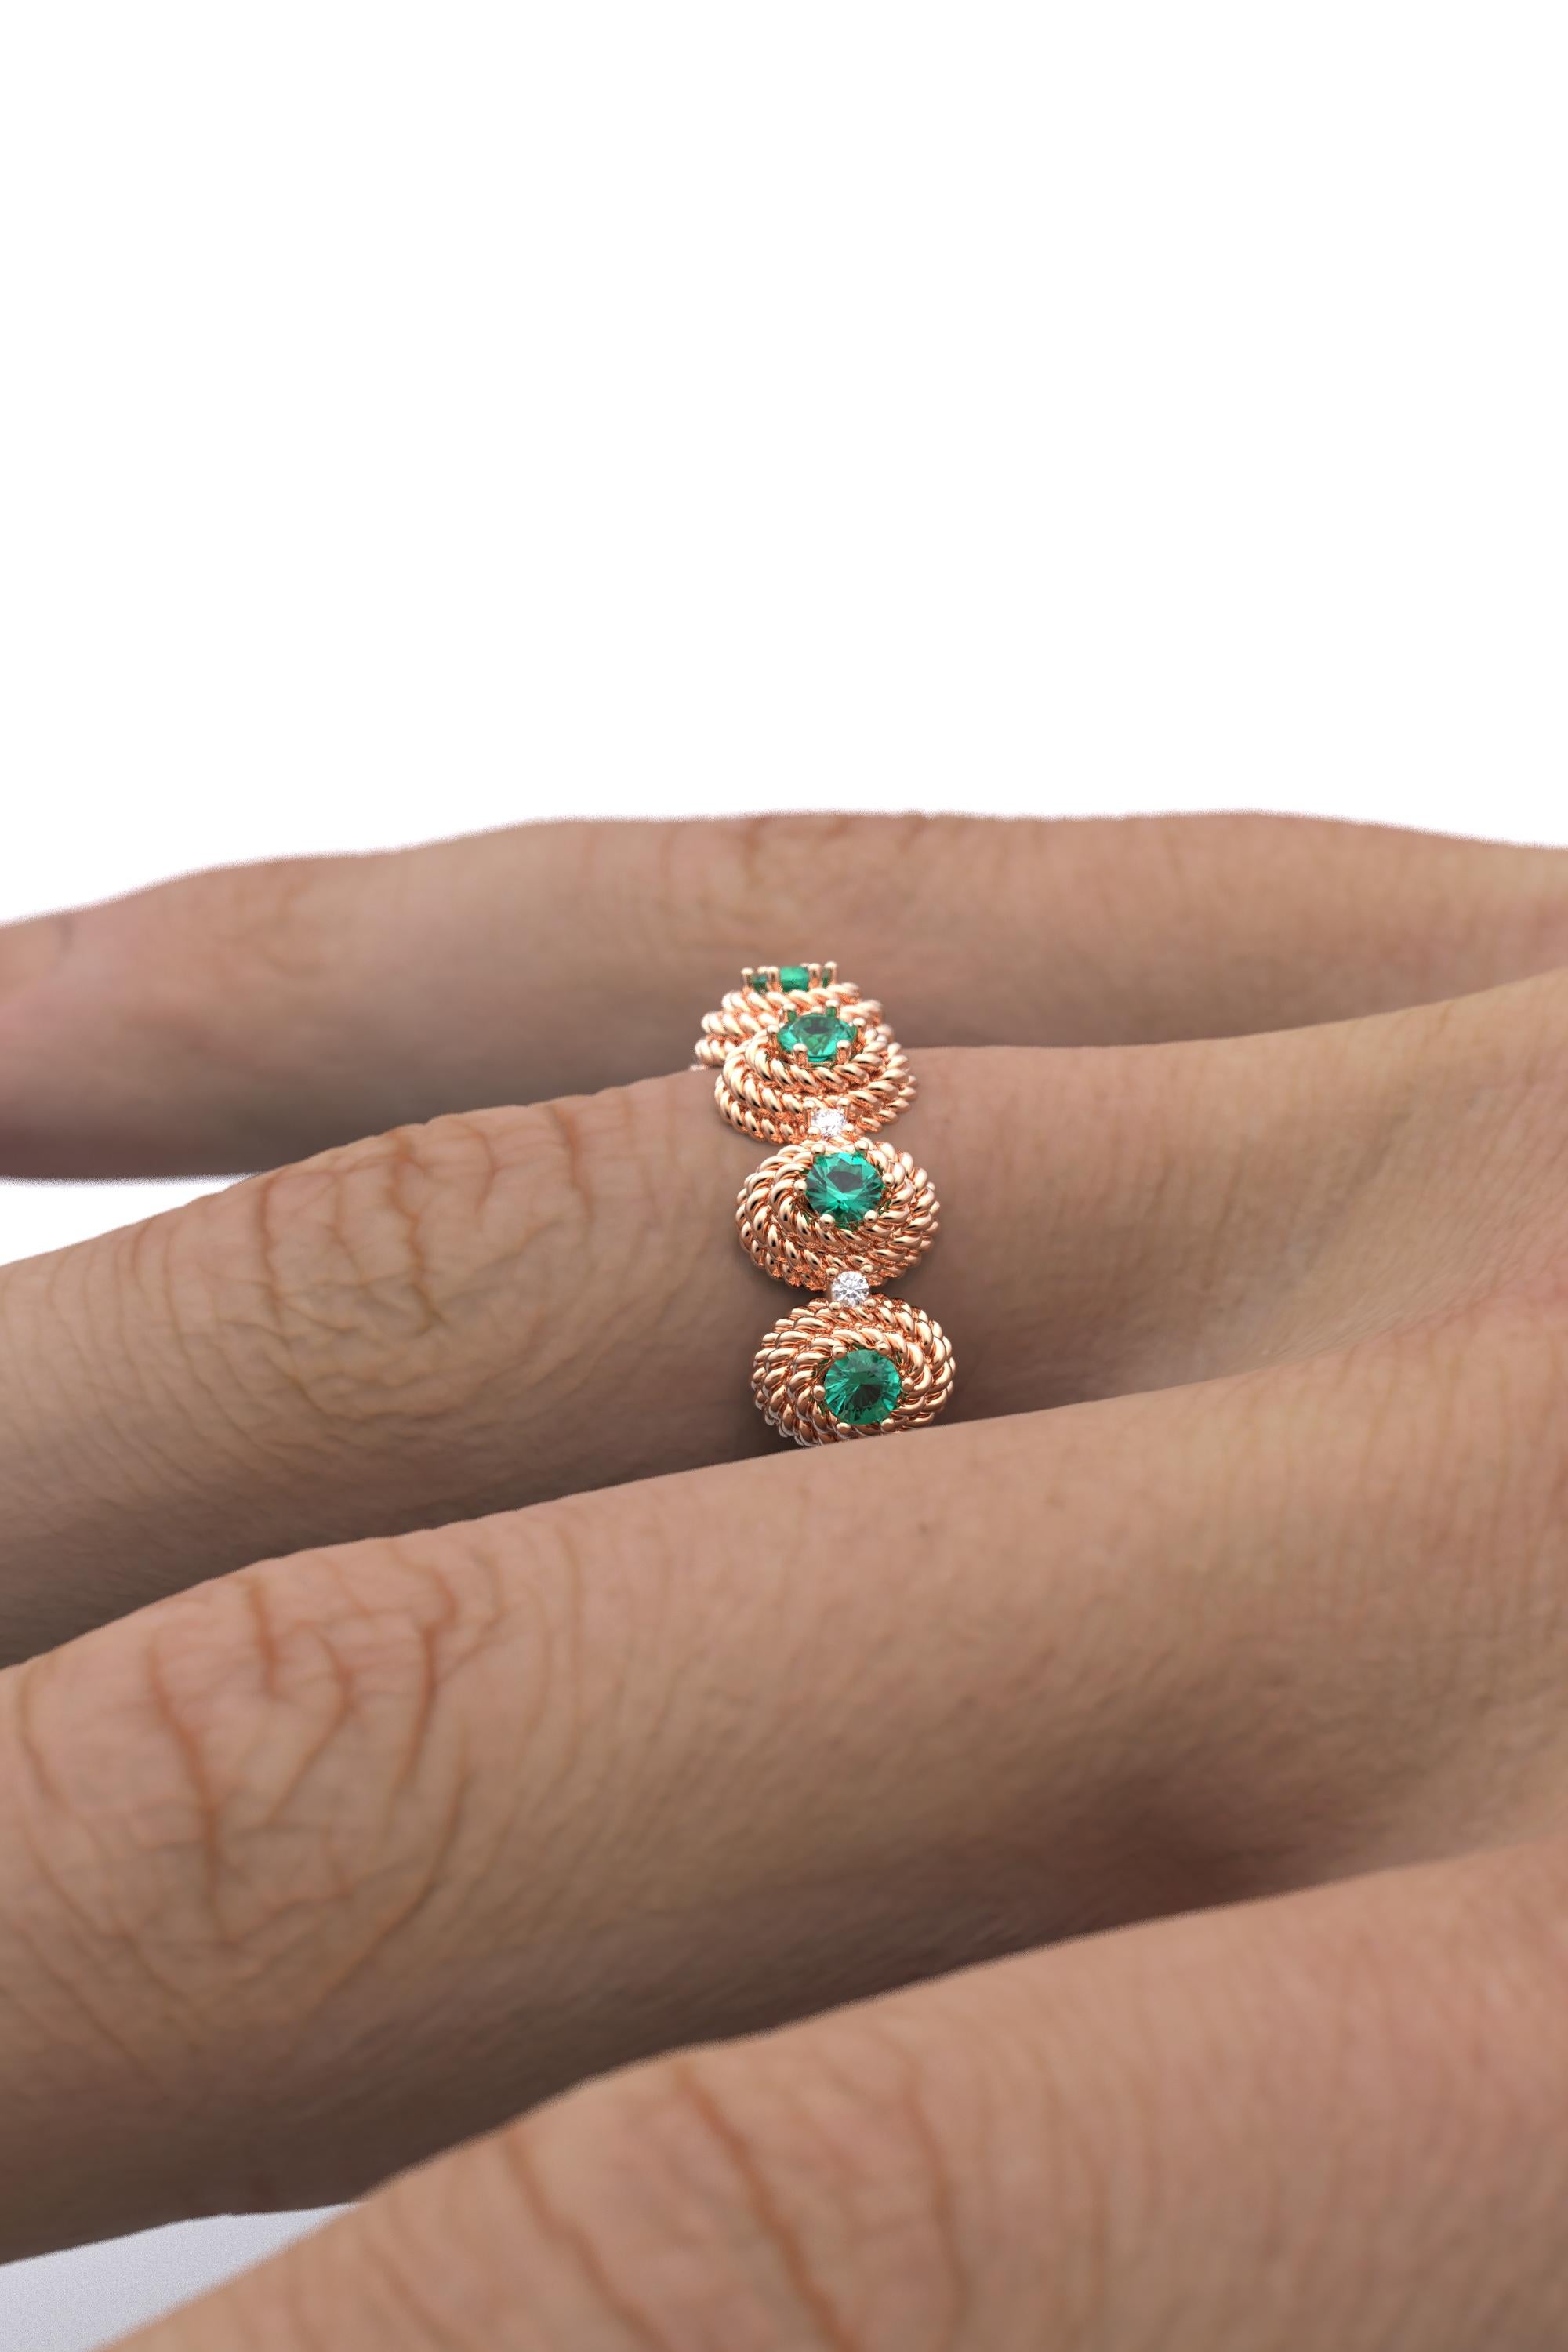 For Sale:  Emerald and Diamond Ring Made in Italy in 14k Gold by Oltremare Gioielli 9